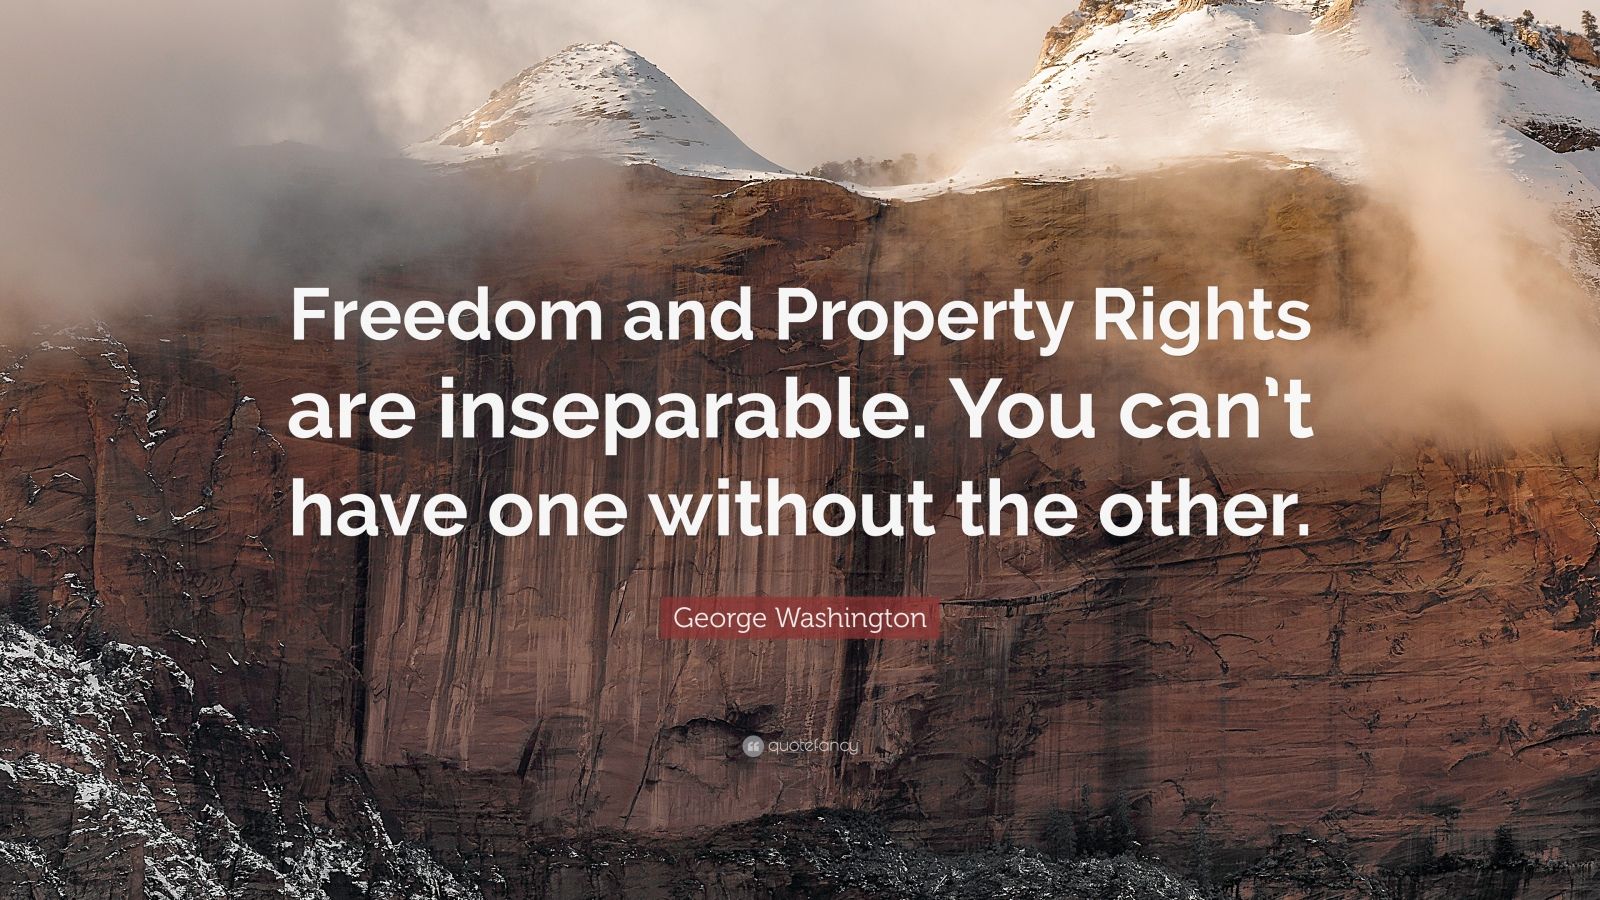 Washington Quote “Freedom and Property Rights are